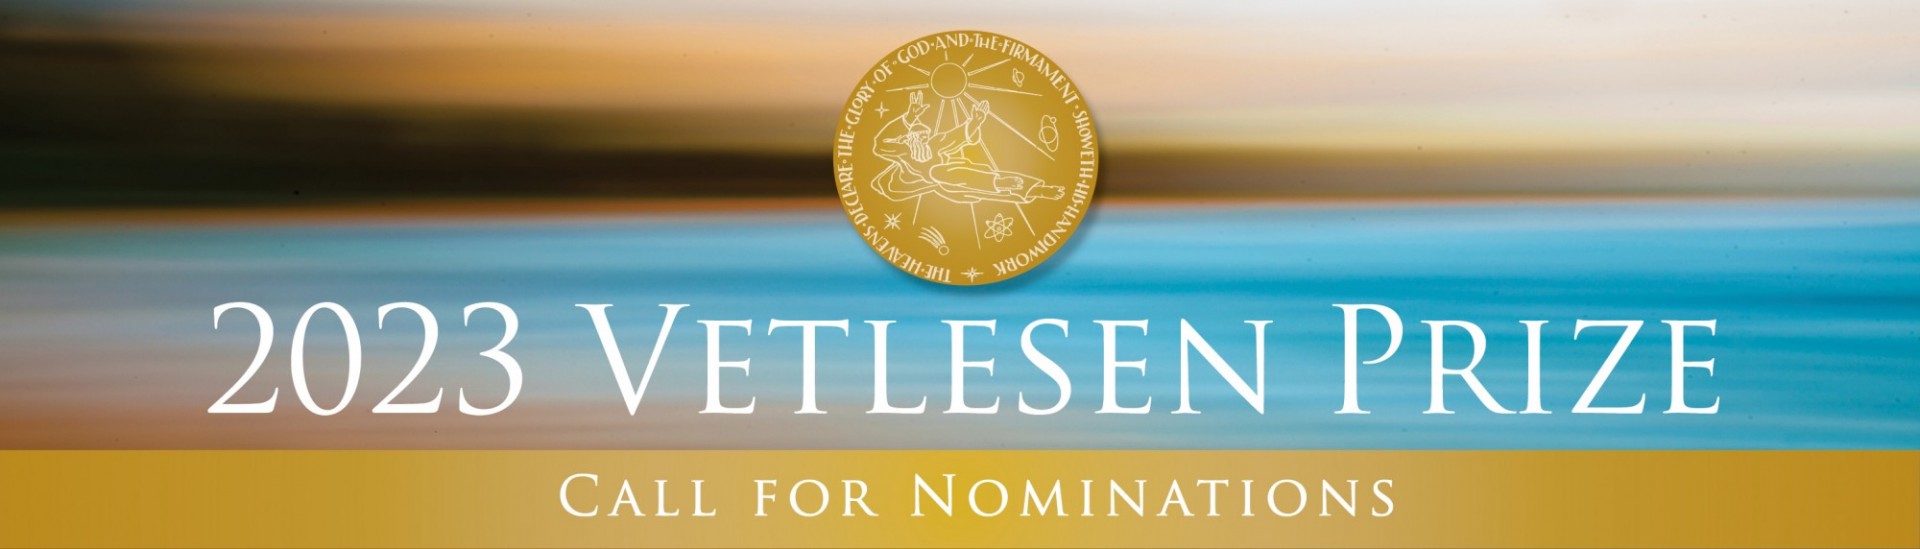 2023 Vetlesen Prize Call for Nominations